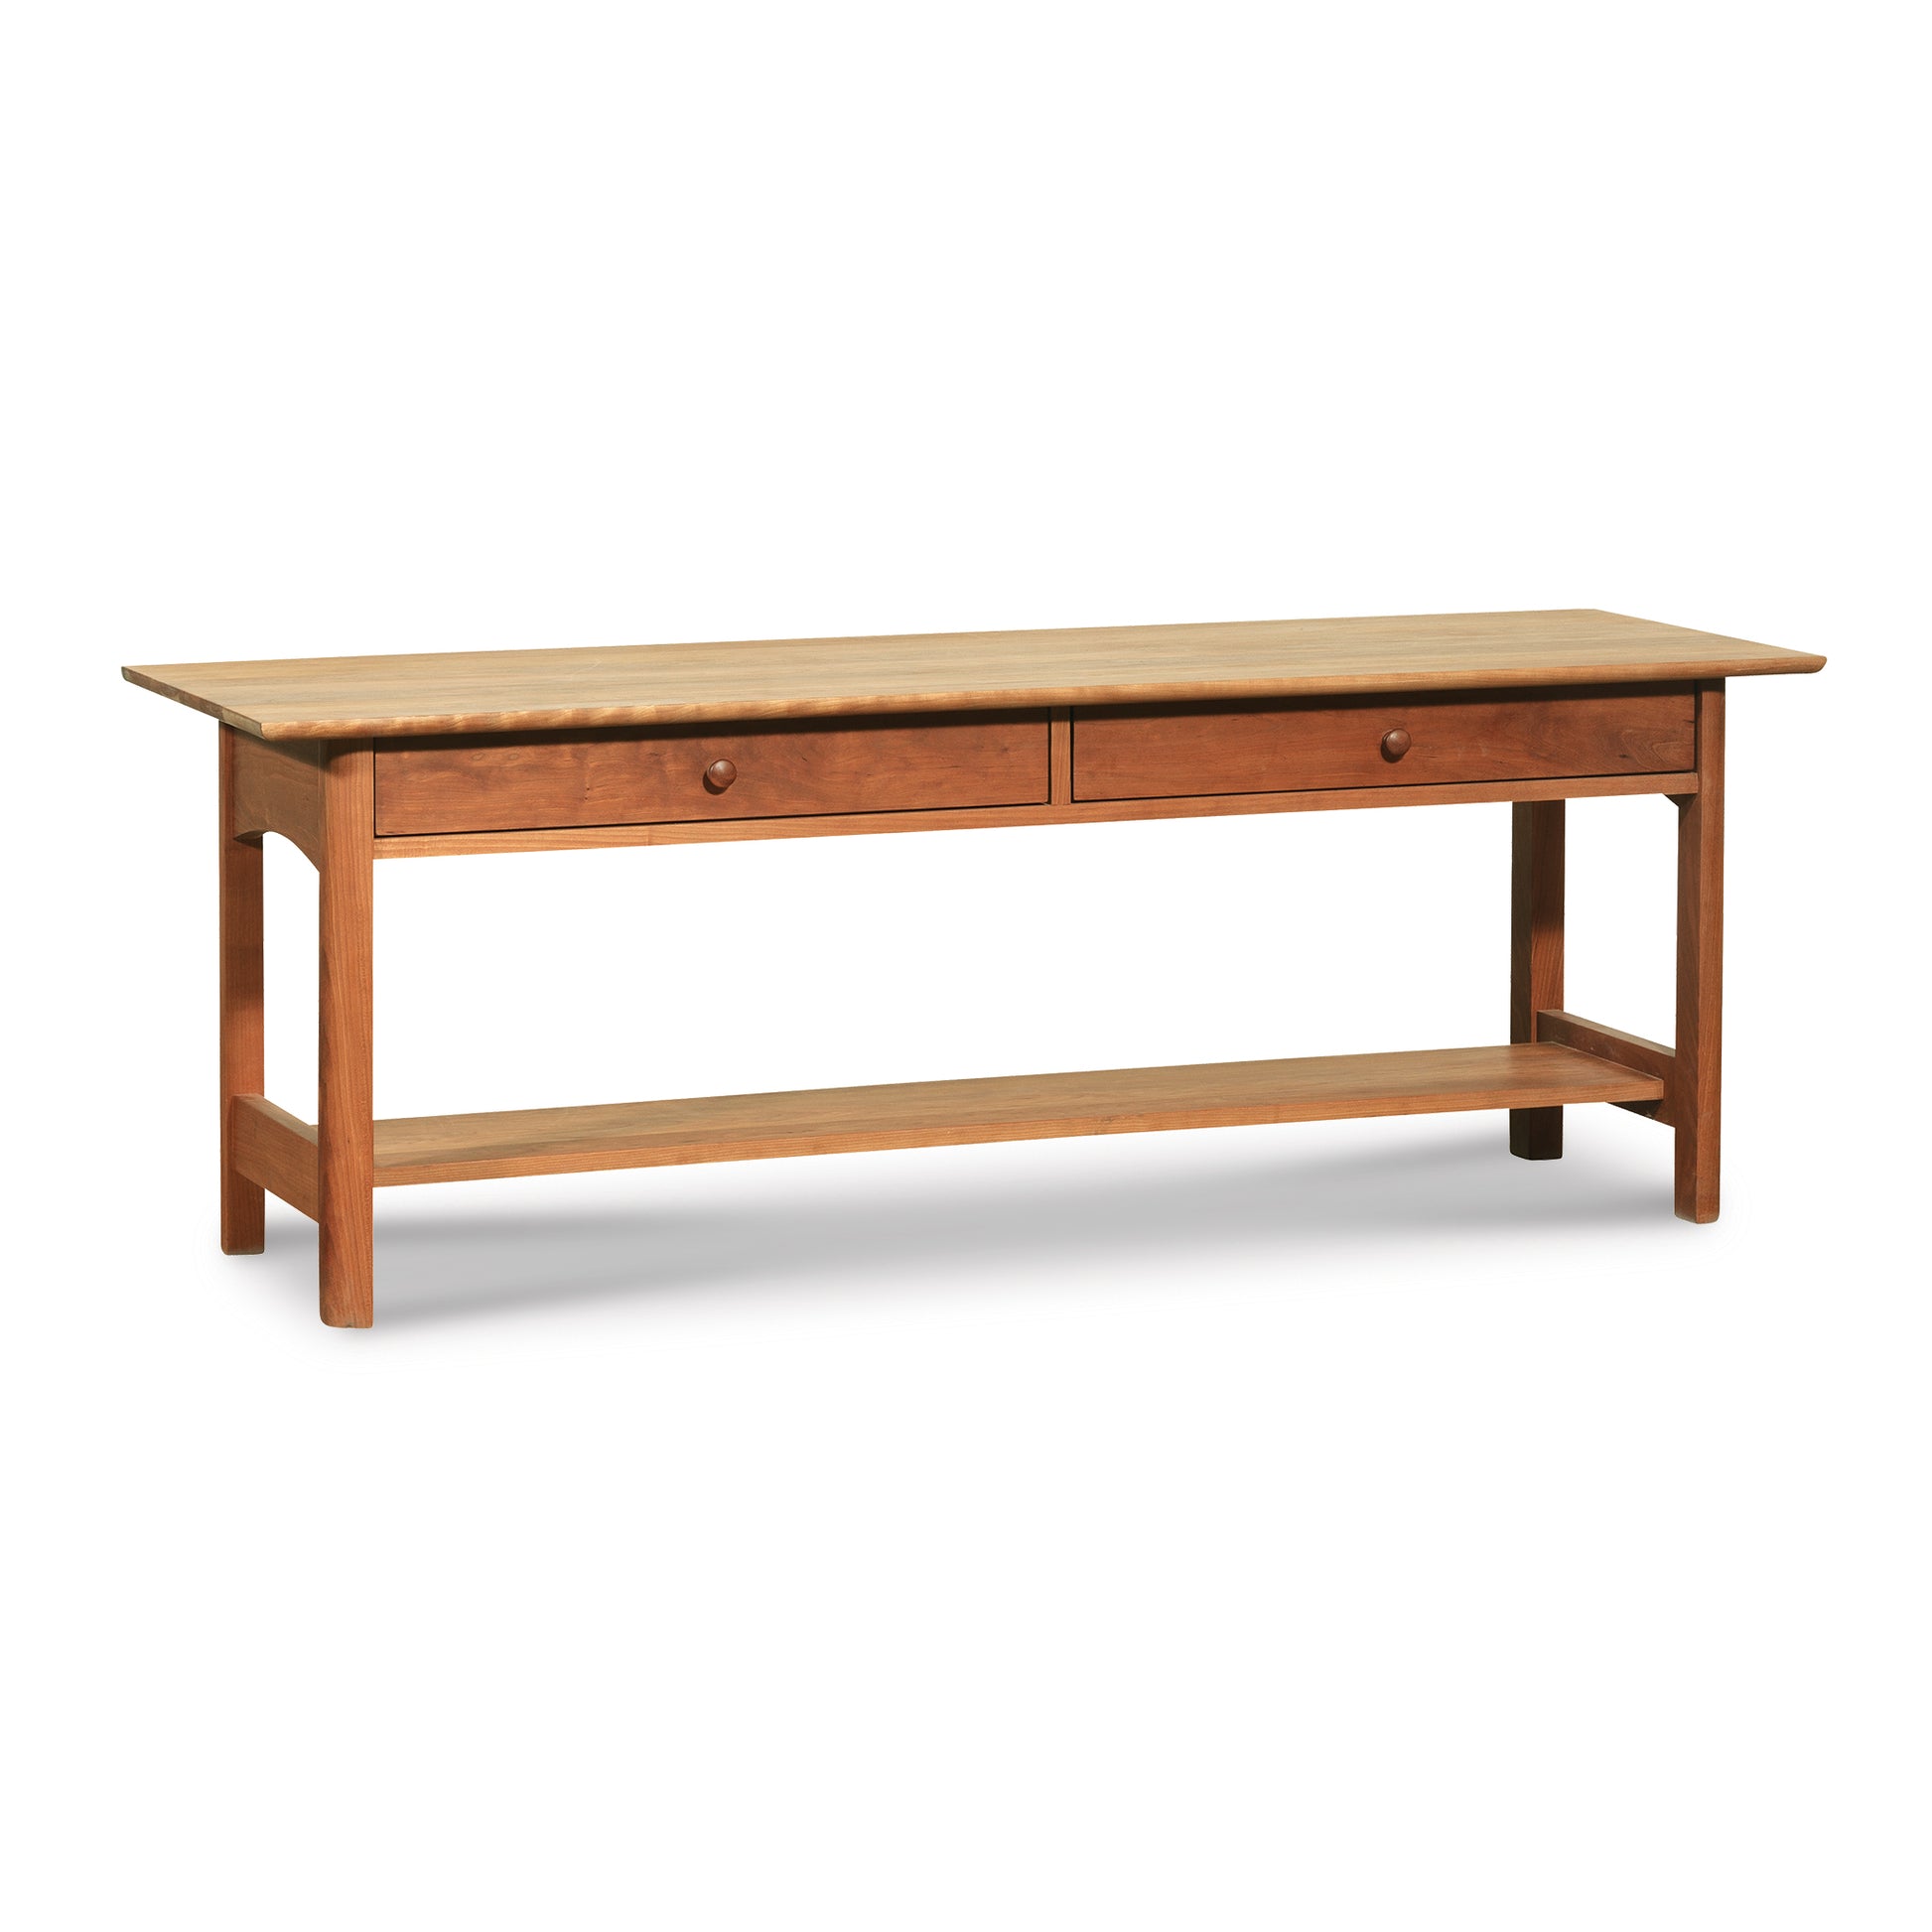 A Heartwood Shaker 2-Drawer Coffee Table by Vermont Furniture Designs with a lower shelf on a plain background.